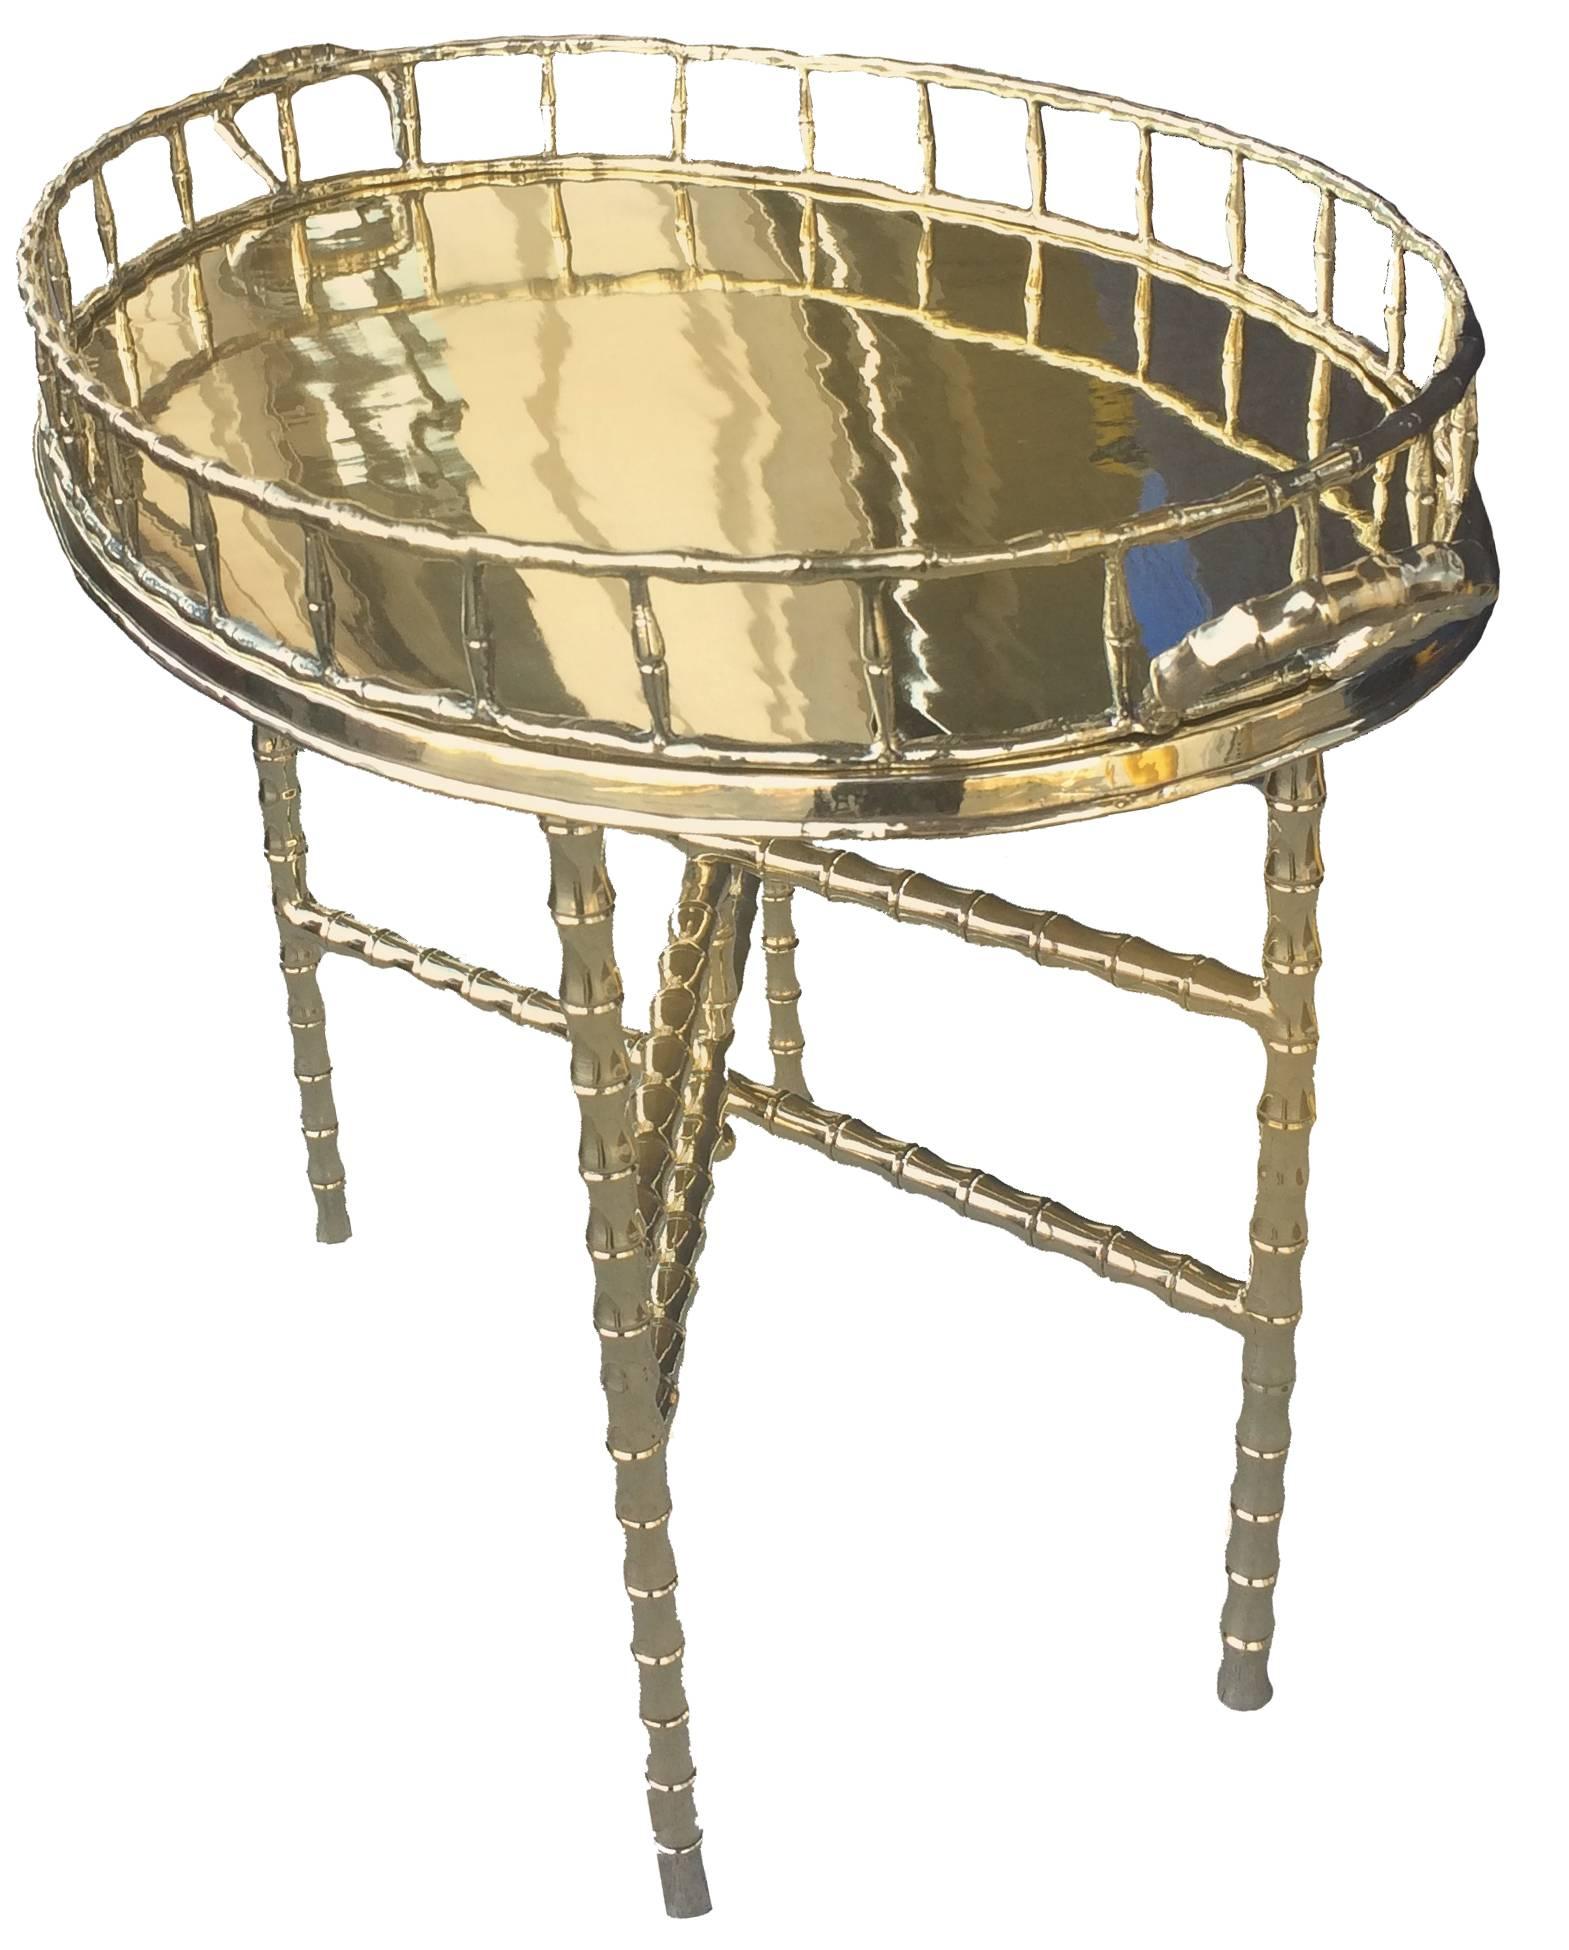 1960s brass bamboo-style table with oval tray top. Tray removes from stand and stand folds flat. Recently re-plated and polished.
 